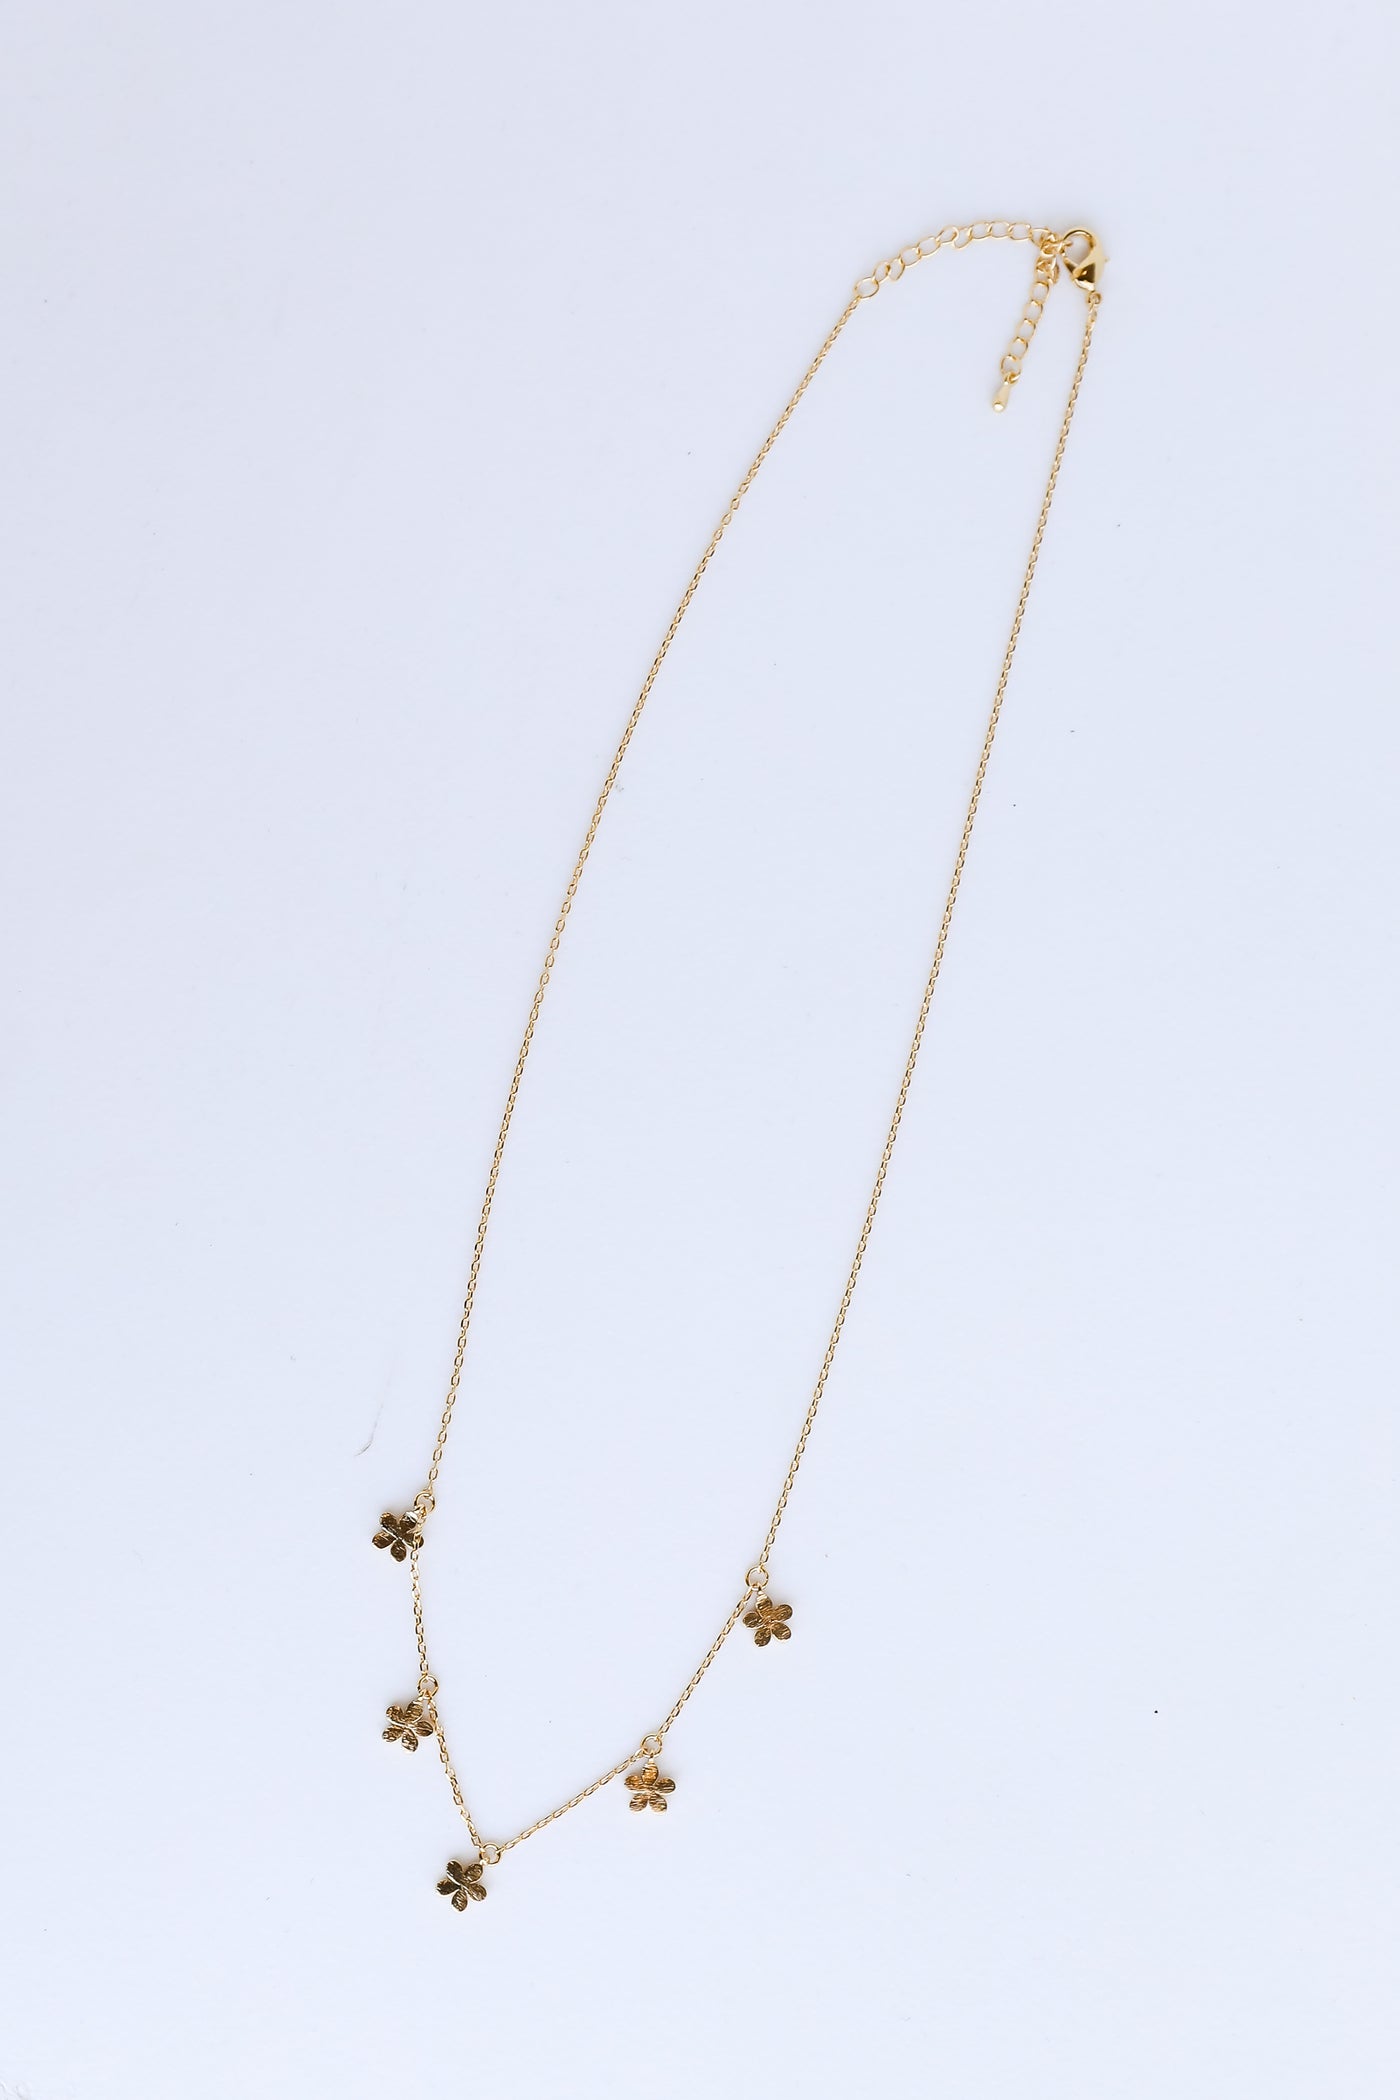 Gold Flower Charm Necklace flat lay